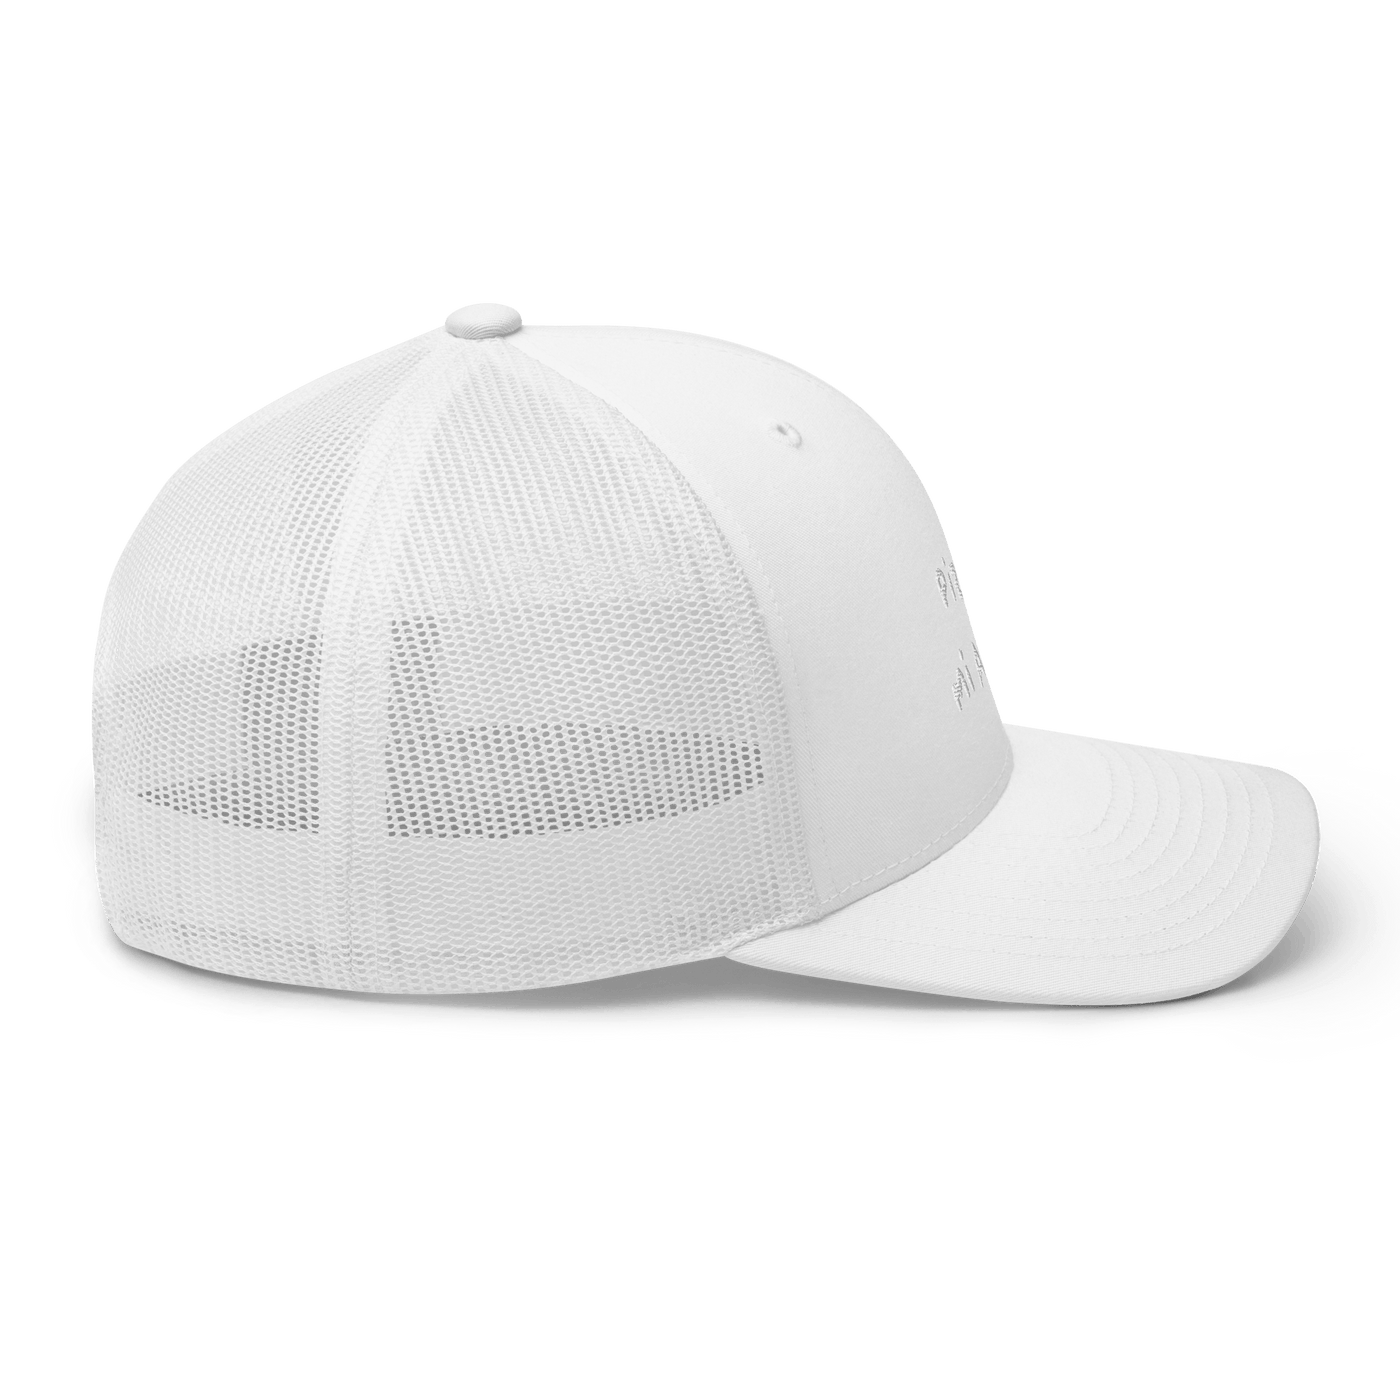 Pizza Mi Amore Trucker Cap - White - - Just Another Cap Store